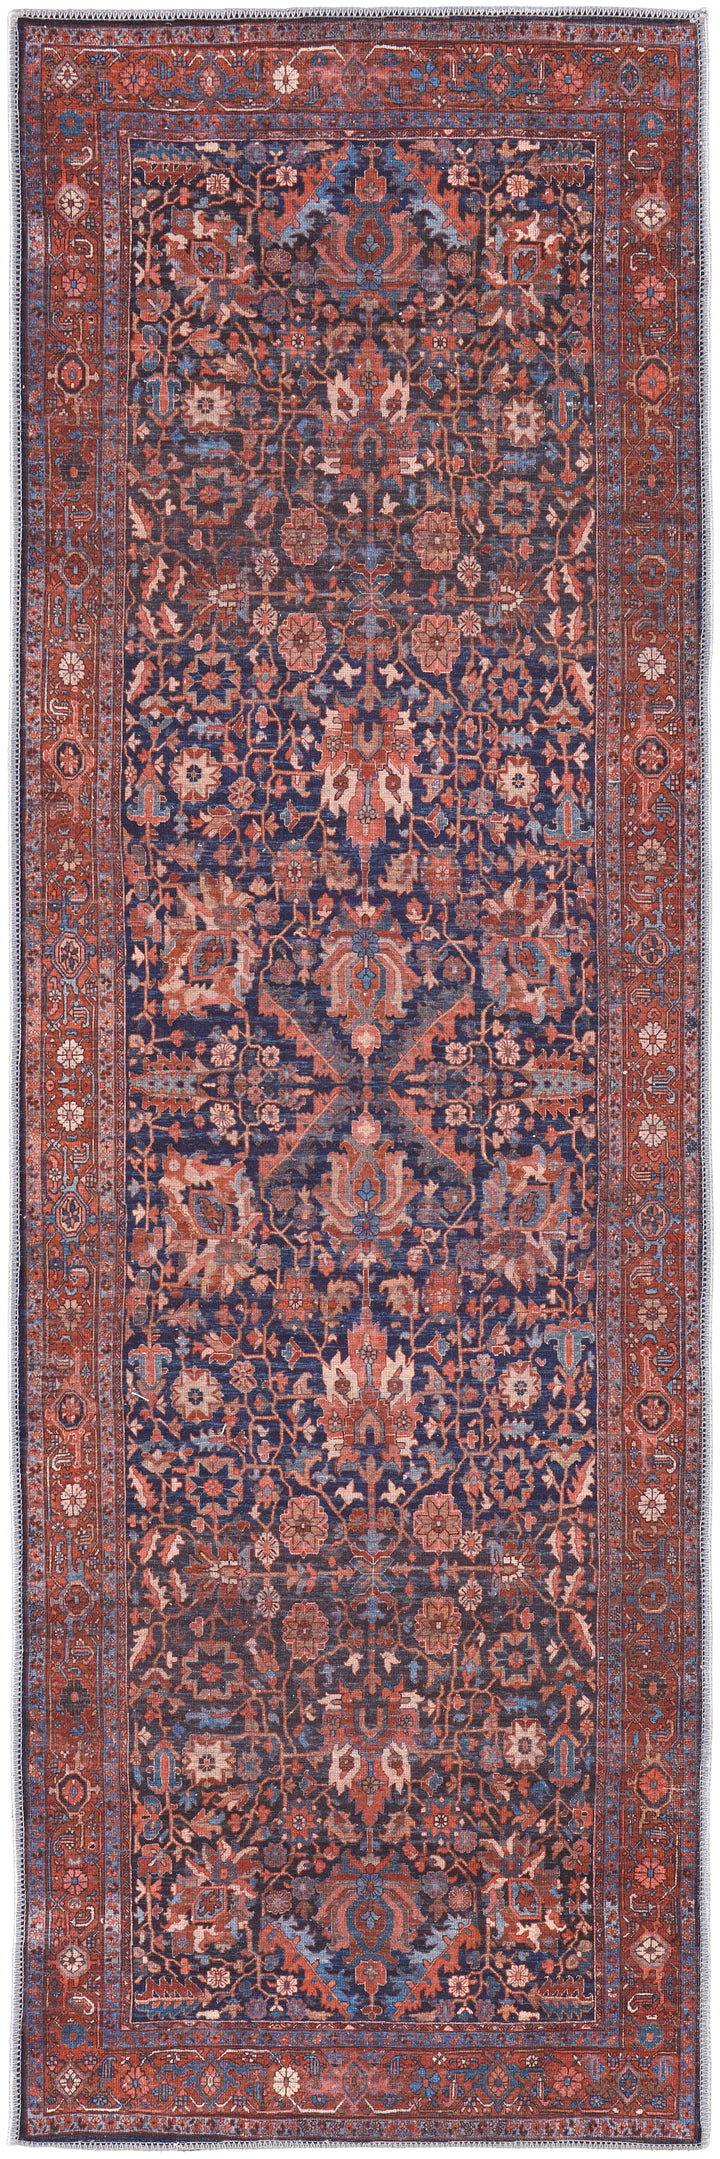 Rawlins Transitional Oriental Runner Available in 5 Colors